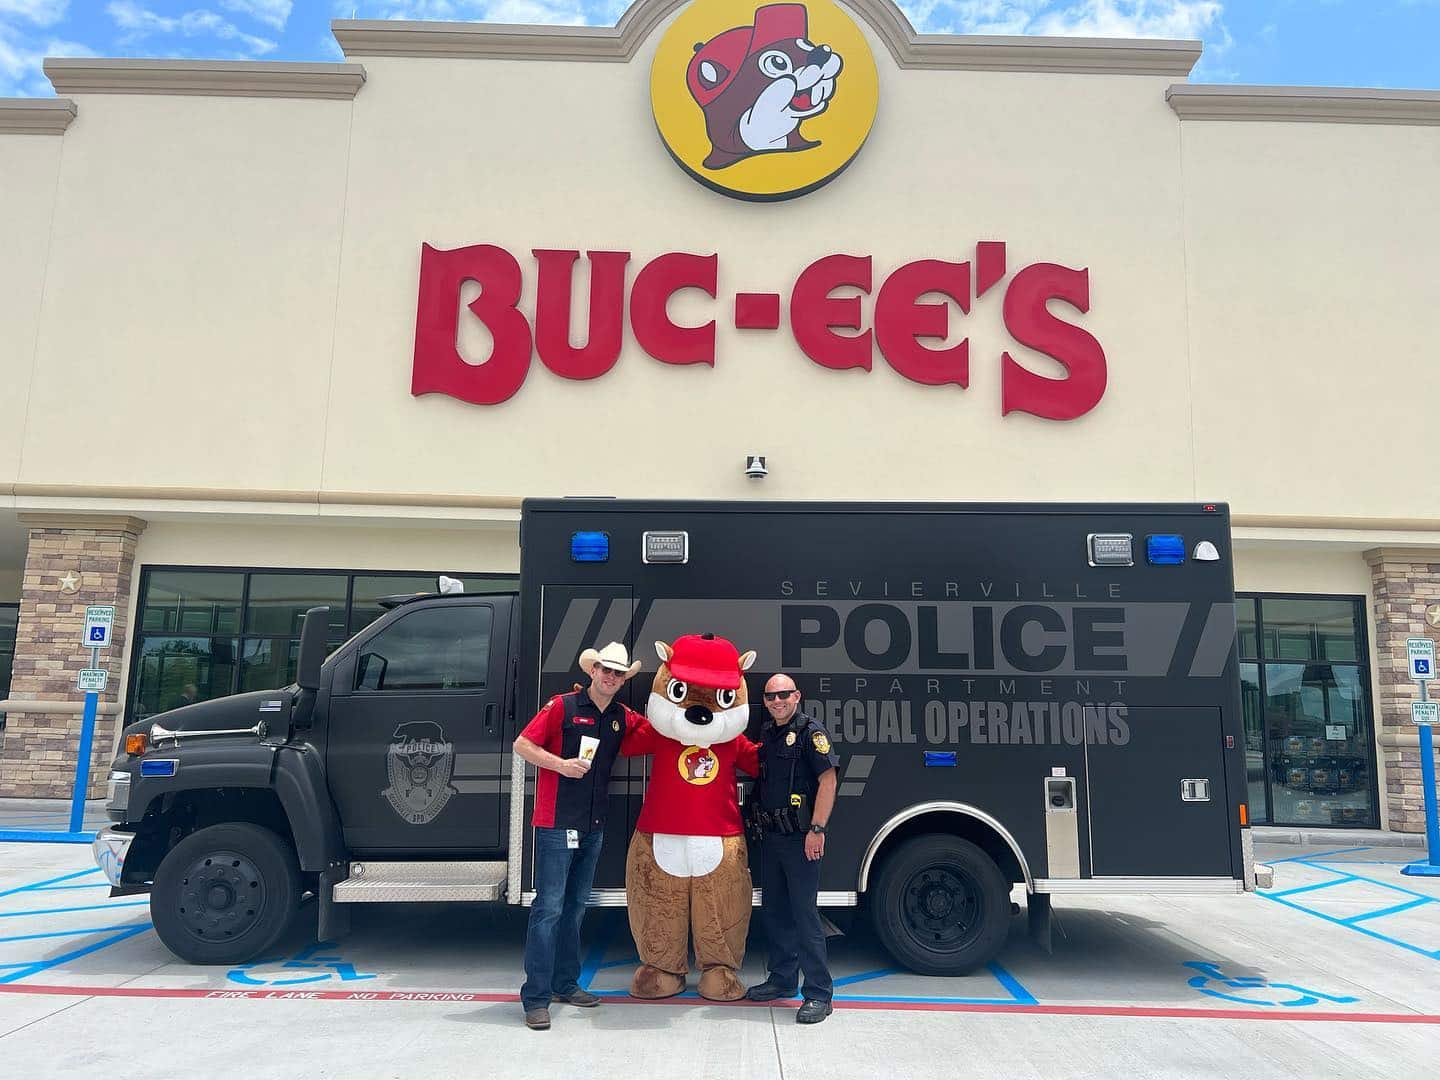 Police officers stand outside Buc-ee's taking a picture with the mascot.